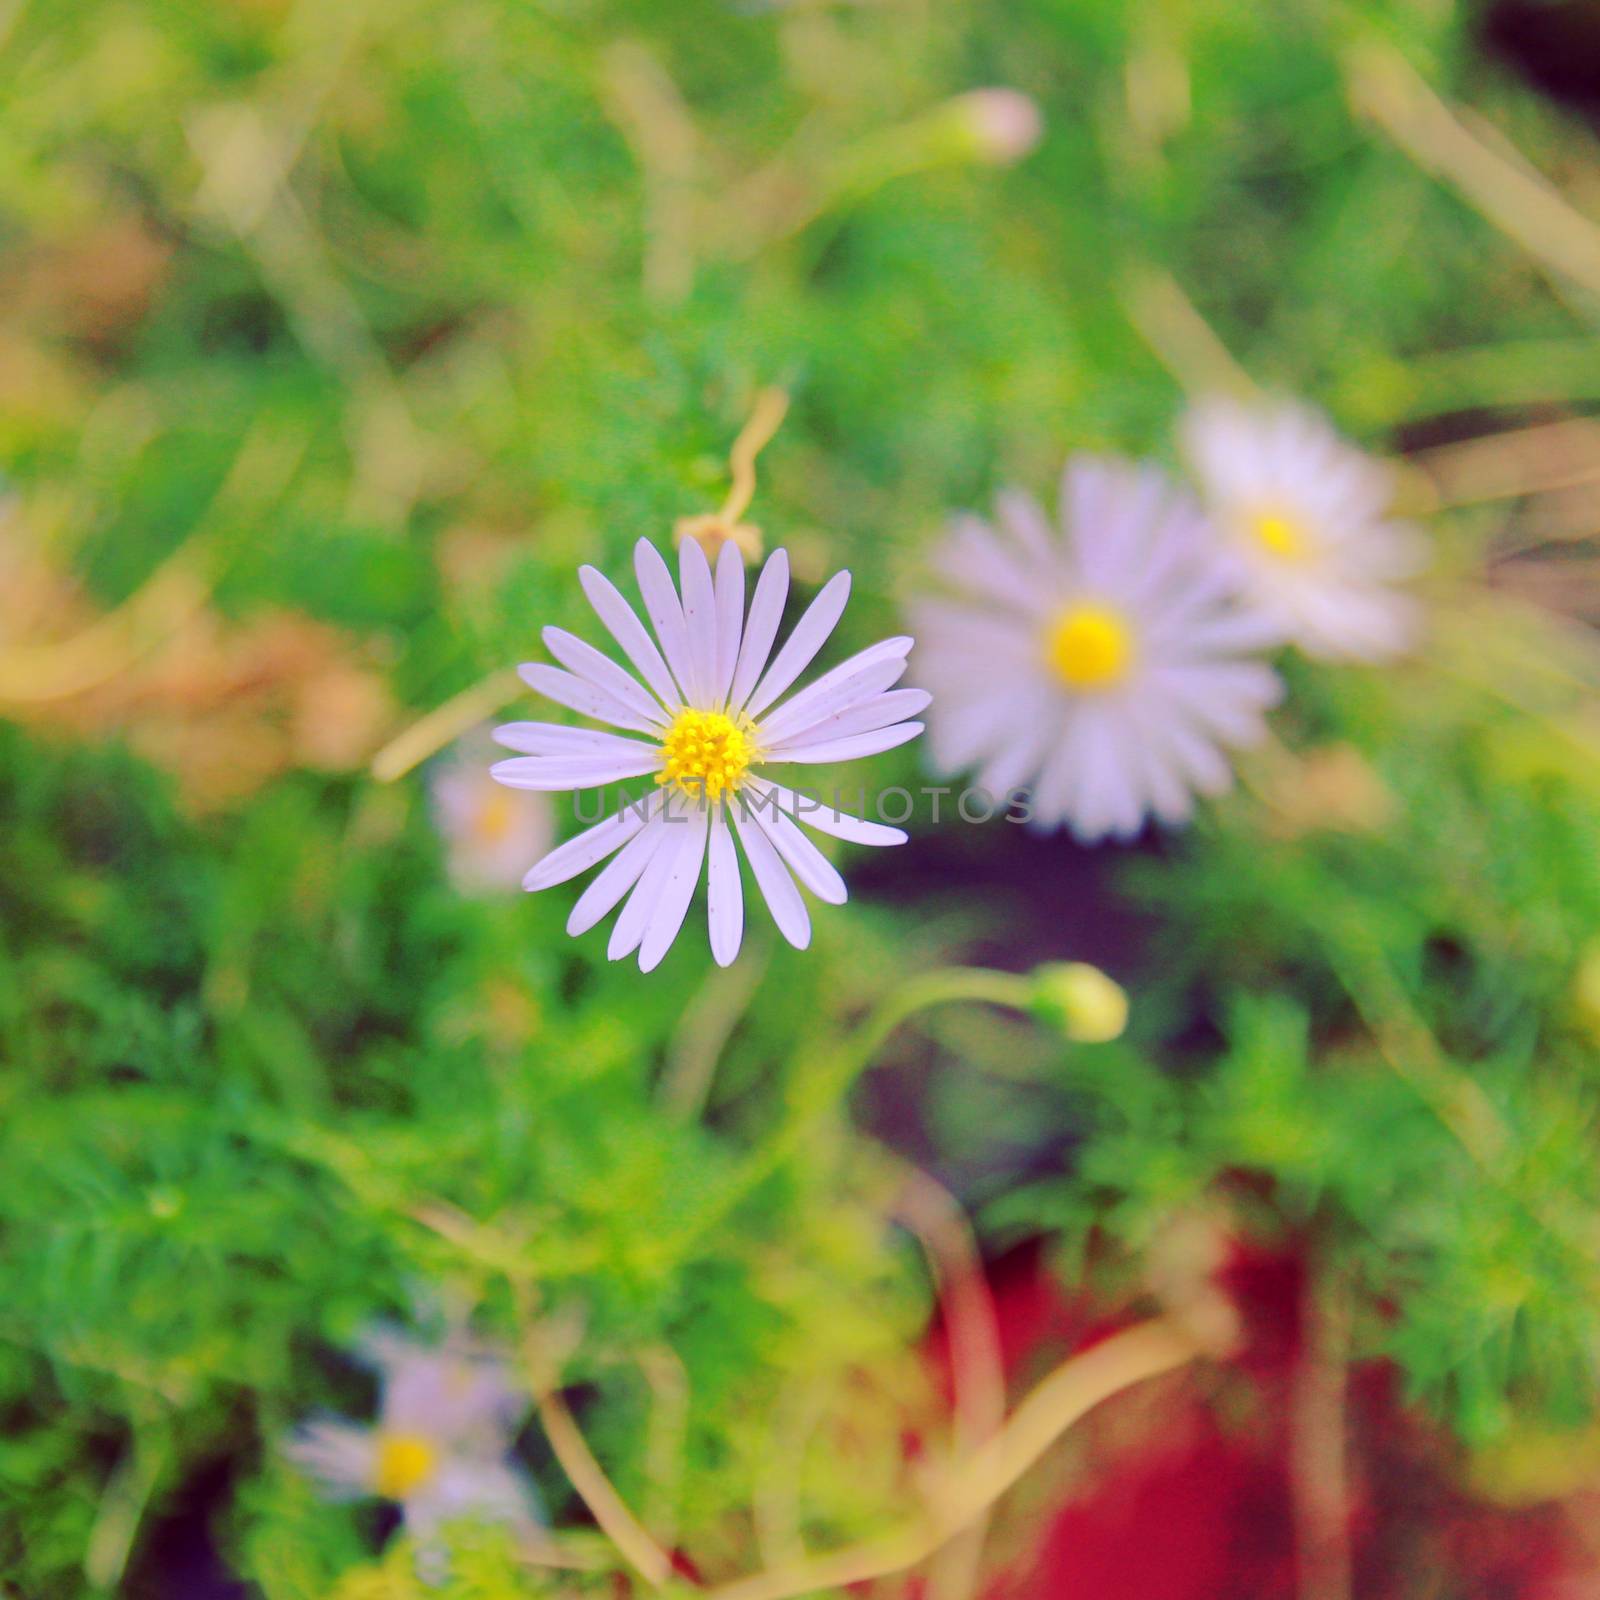 Daisy flowers in garden with retro filter effect